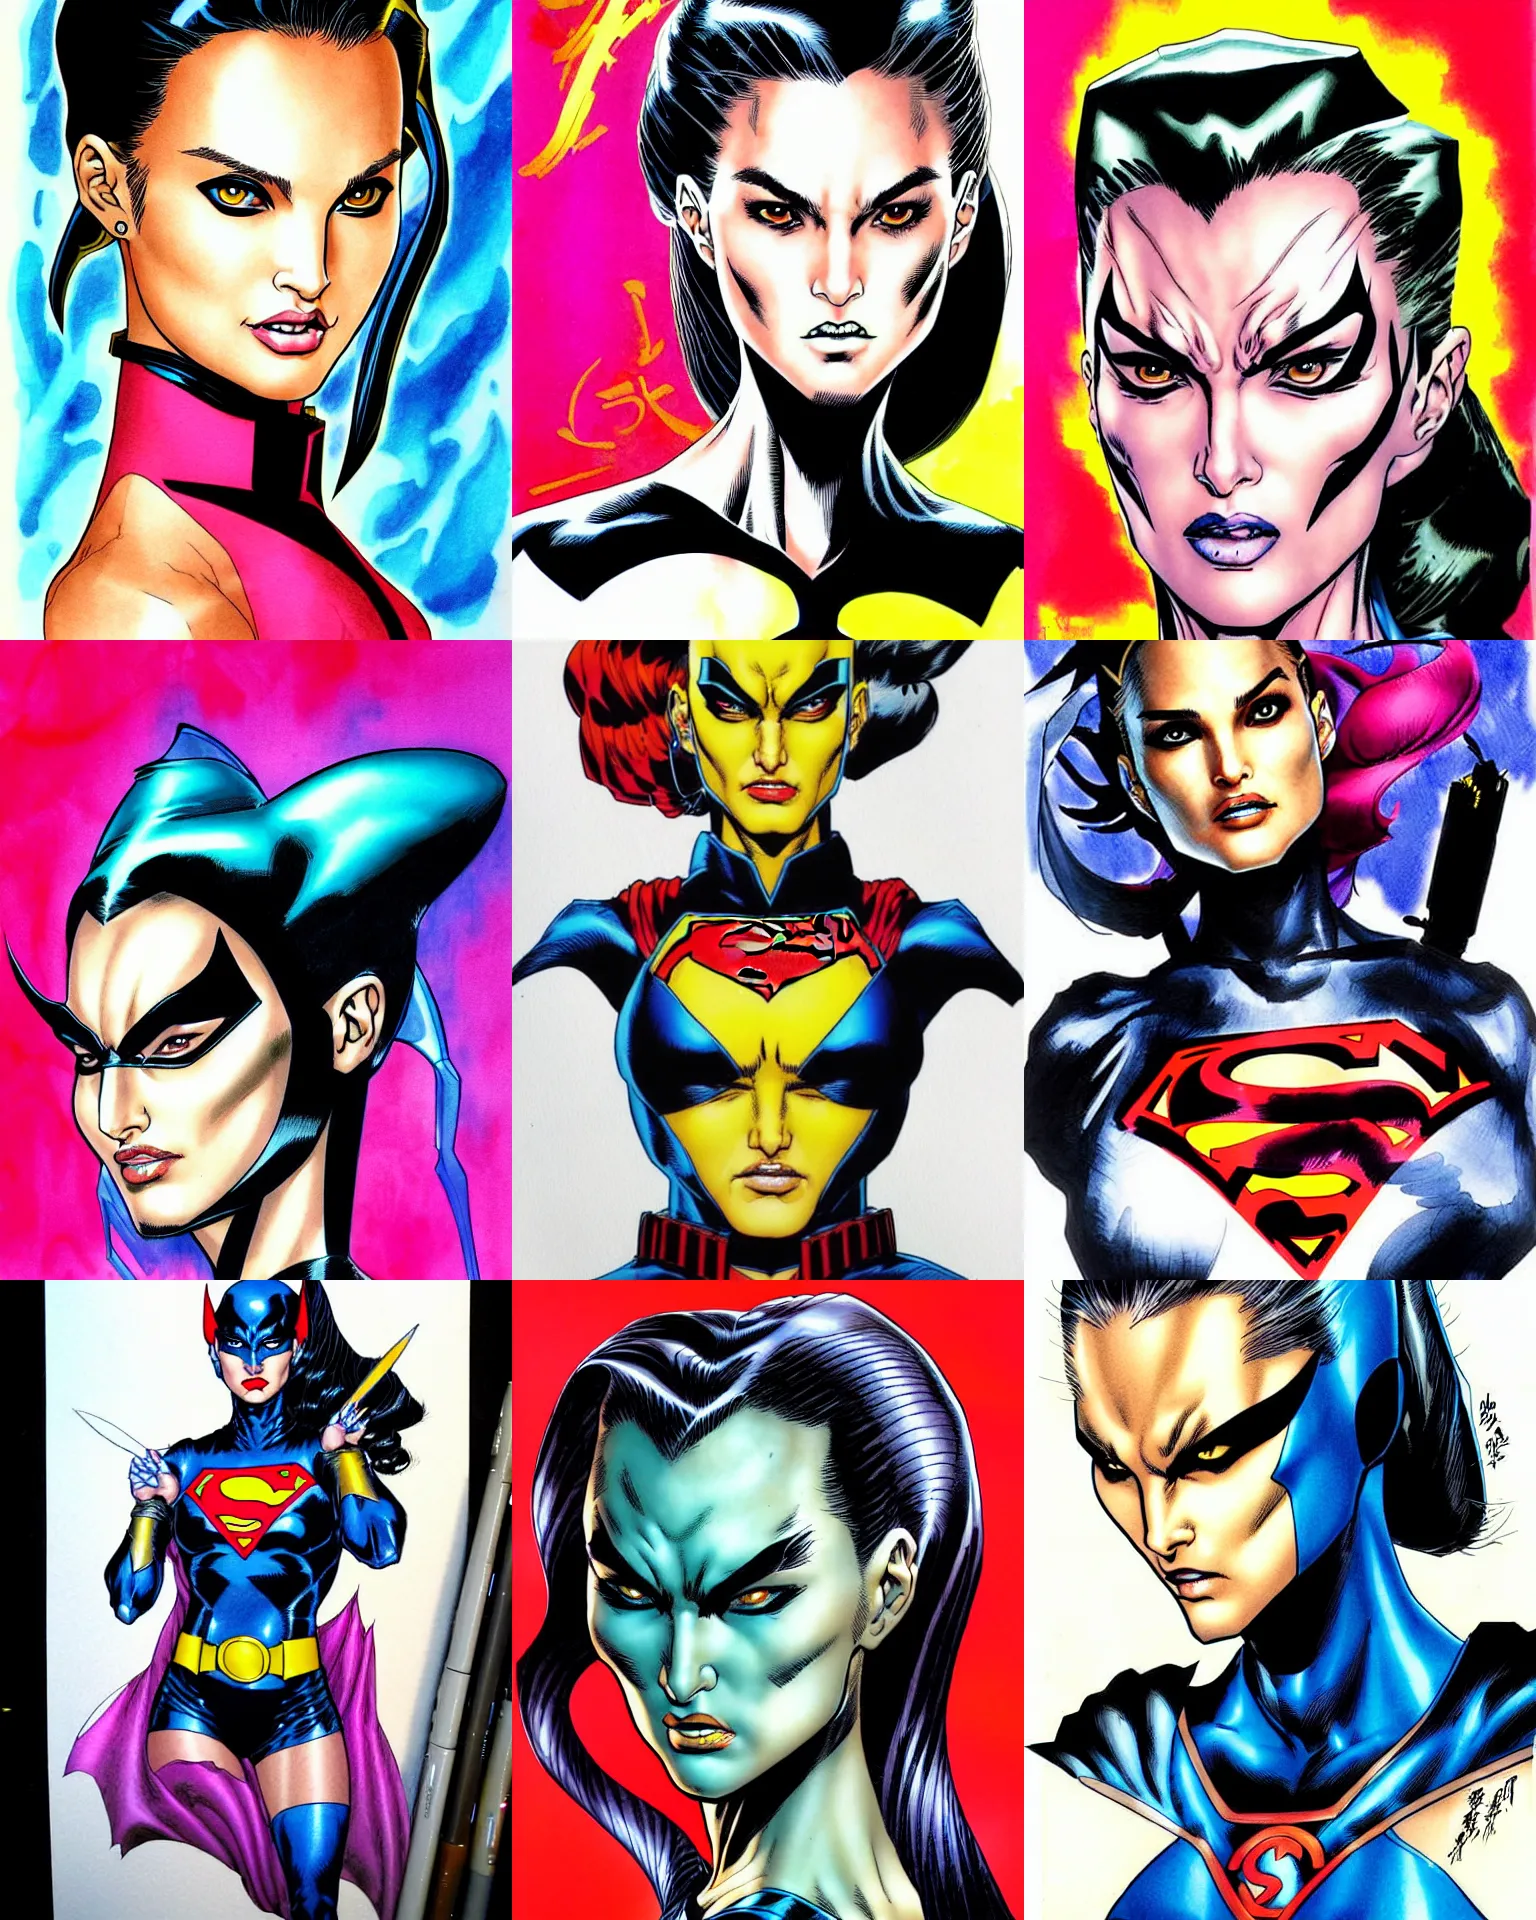 Prompt: jim lee!!! ink colorised airbrushed gouache sketch by jim lee close up headshot of chinese natalie portman as supervillain in the style of jim lee, x - men superhero comic book character by jim lee